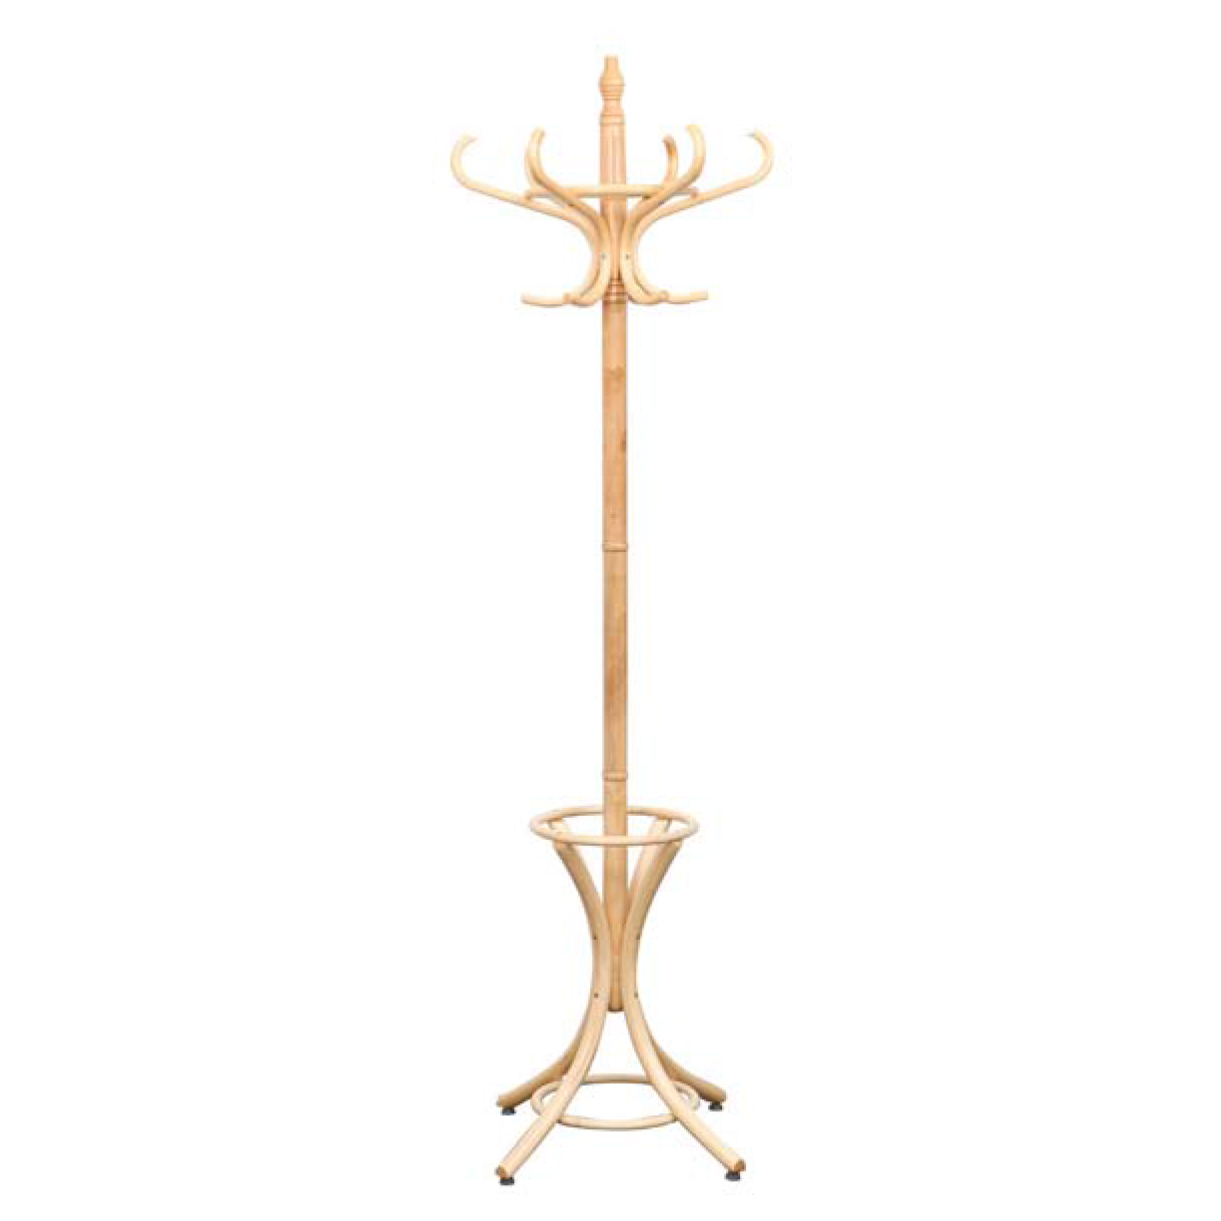 Bentwood Hat And Coat Stand Hatstand, Wooden Coat Stand With Umbrella Holder